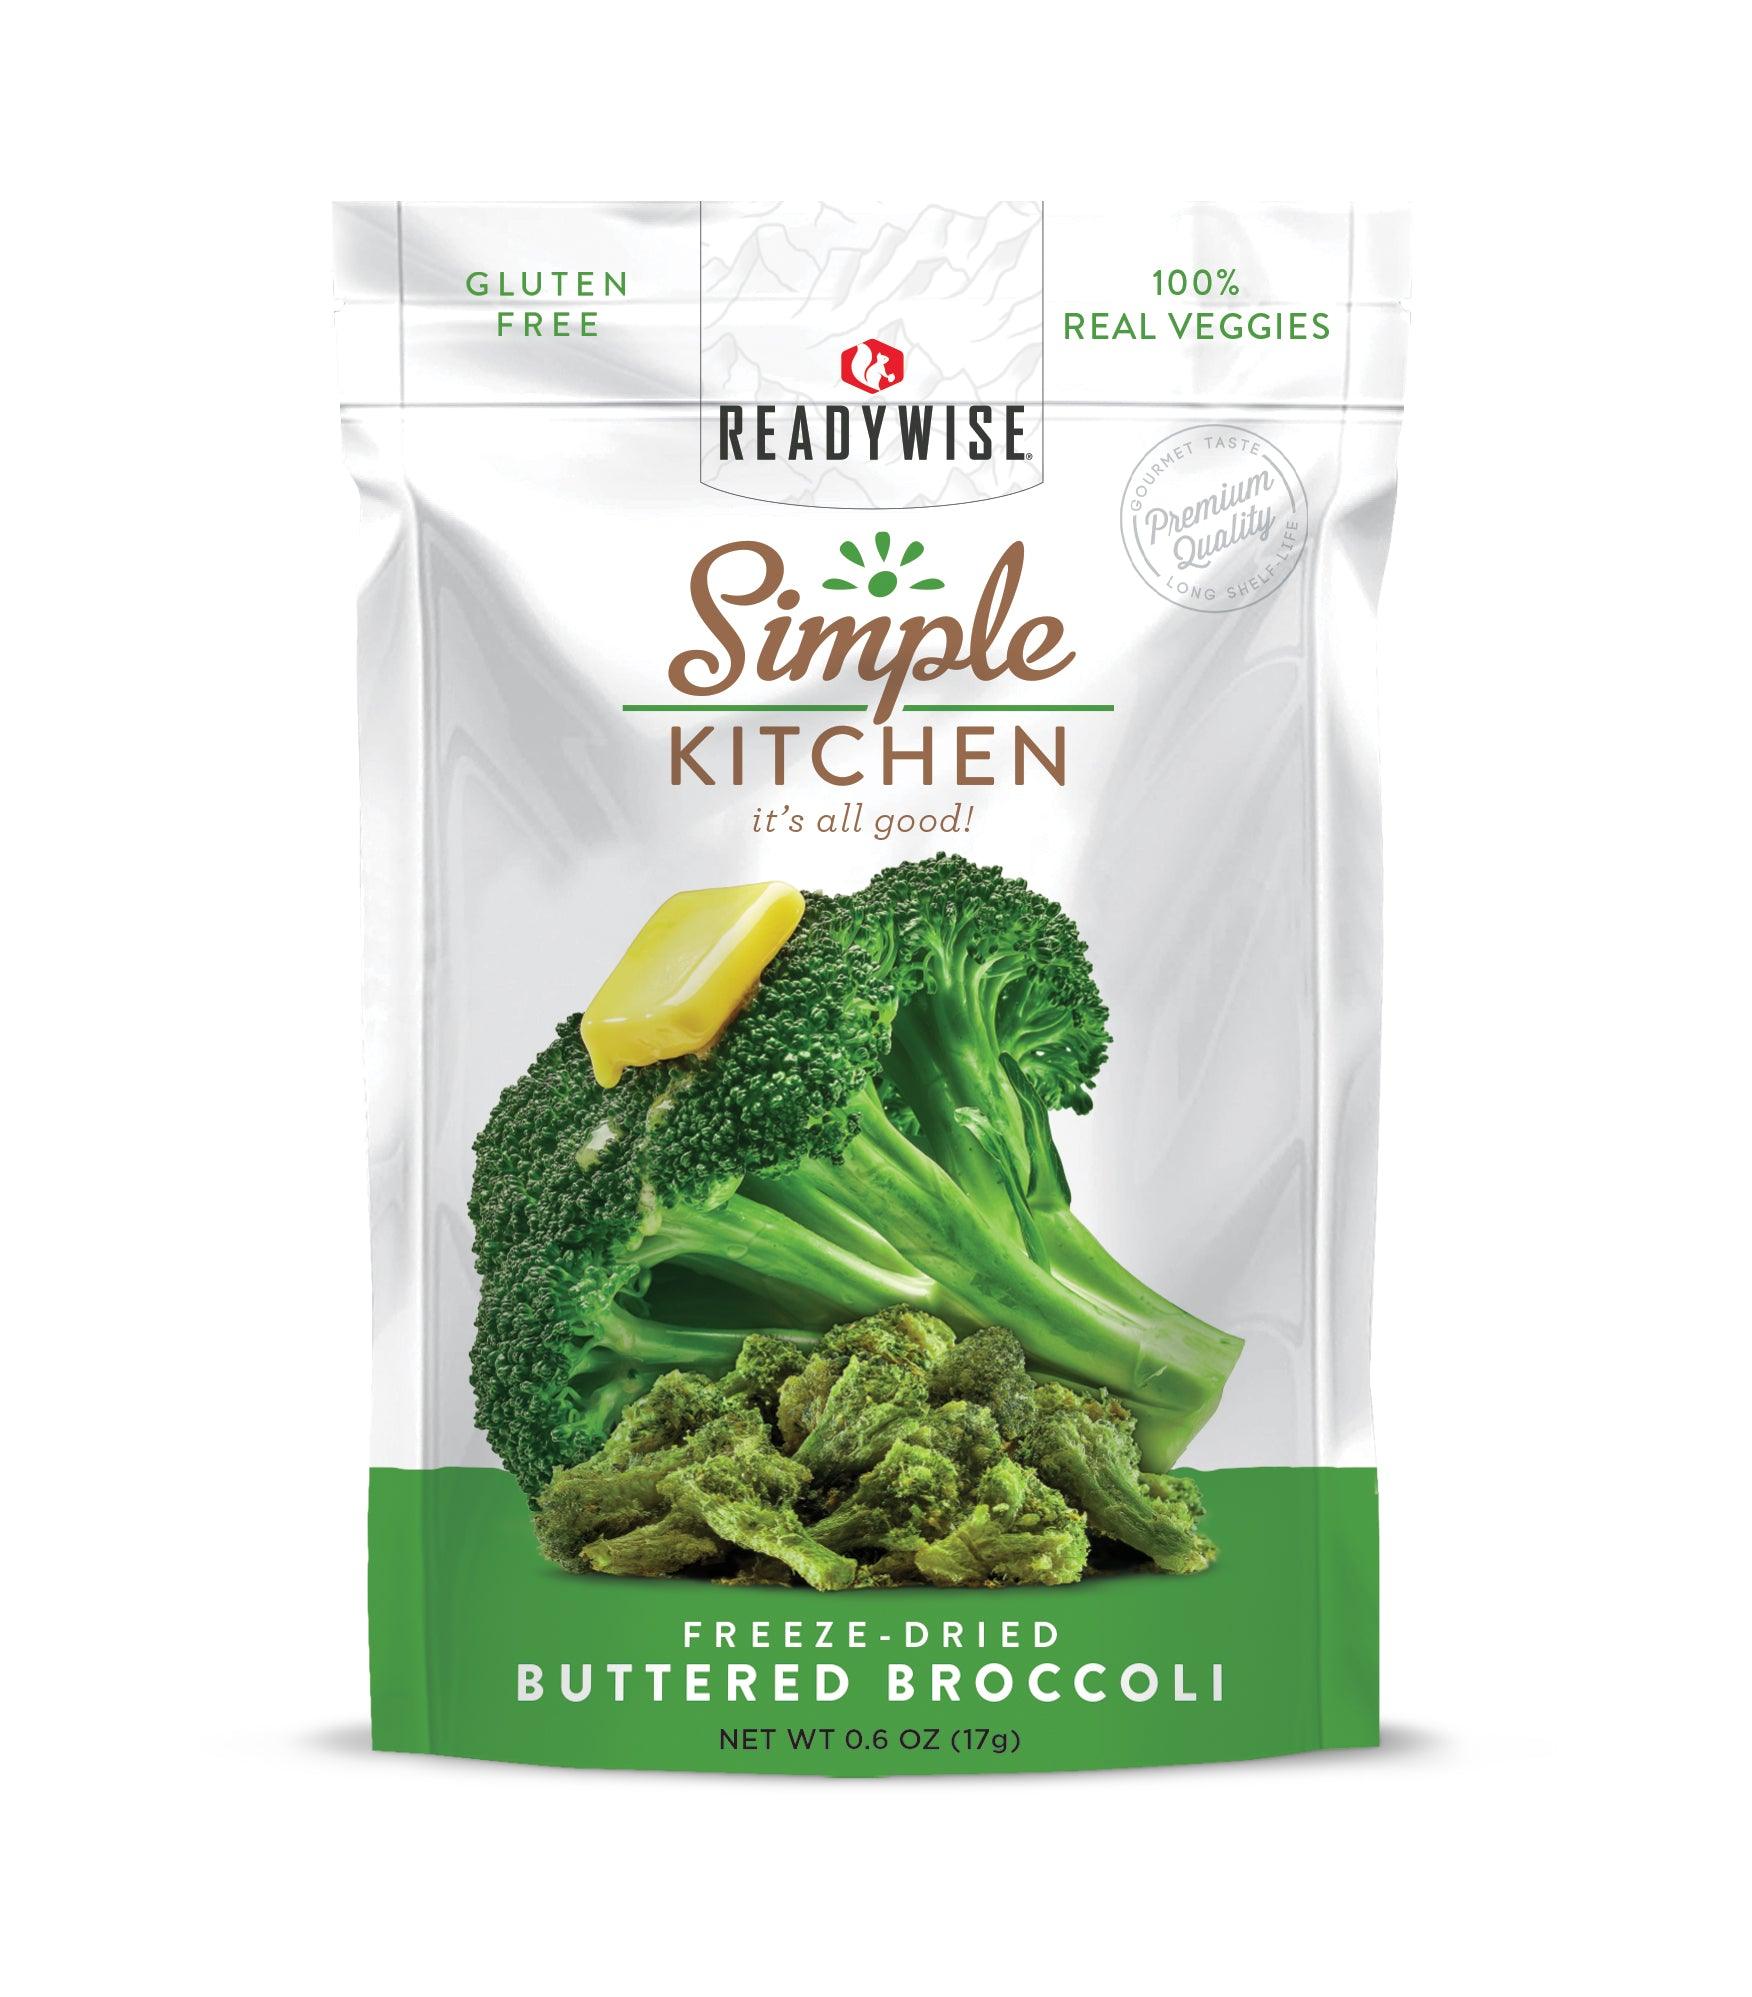 Delicious-healthy-snack-buttered-broccoli-SimpleKitchen